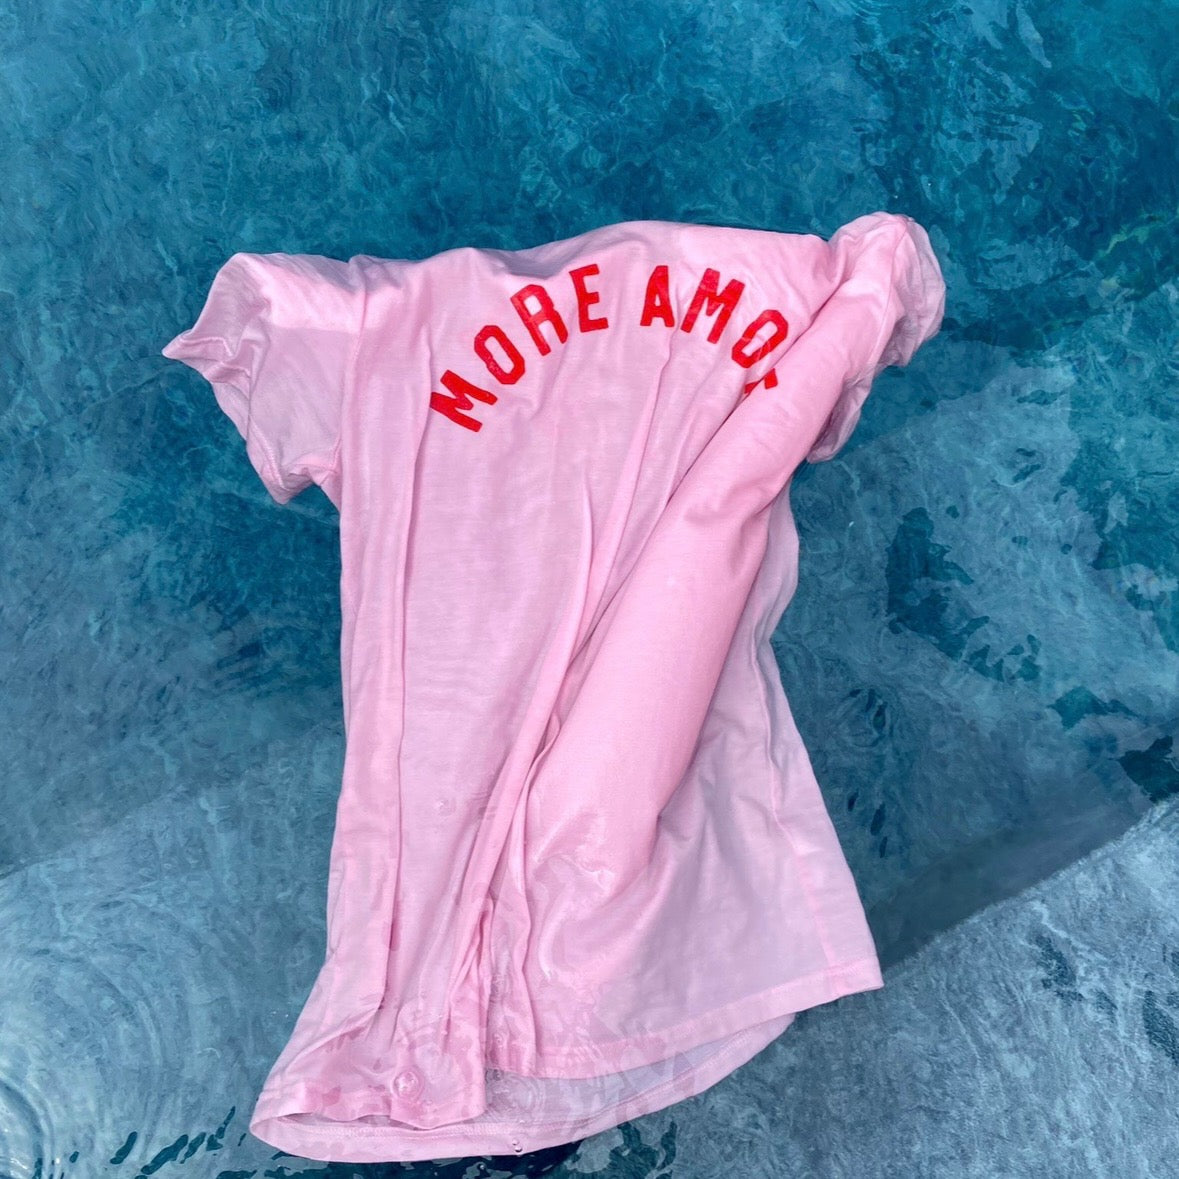 MORE AMORE T-SHIRT – rosa-rot